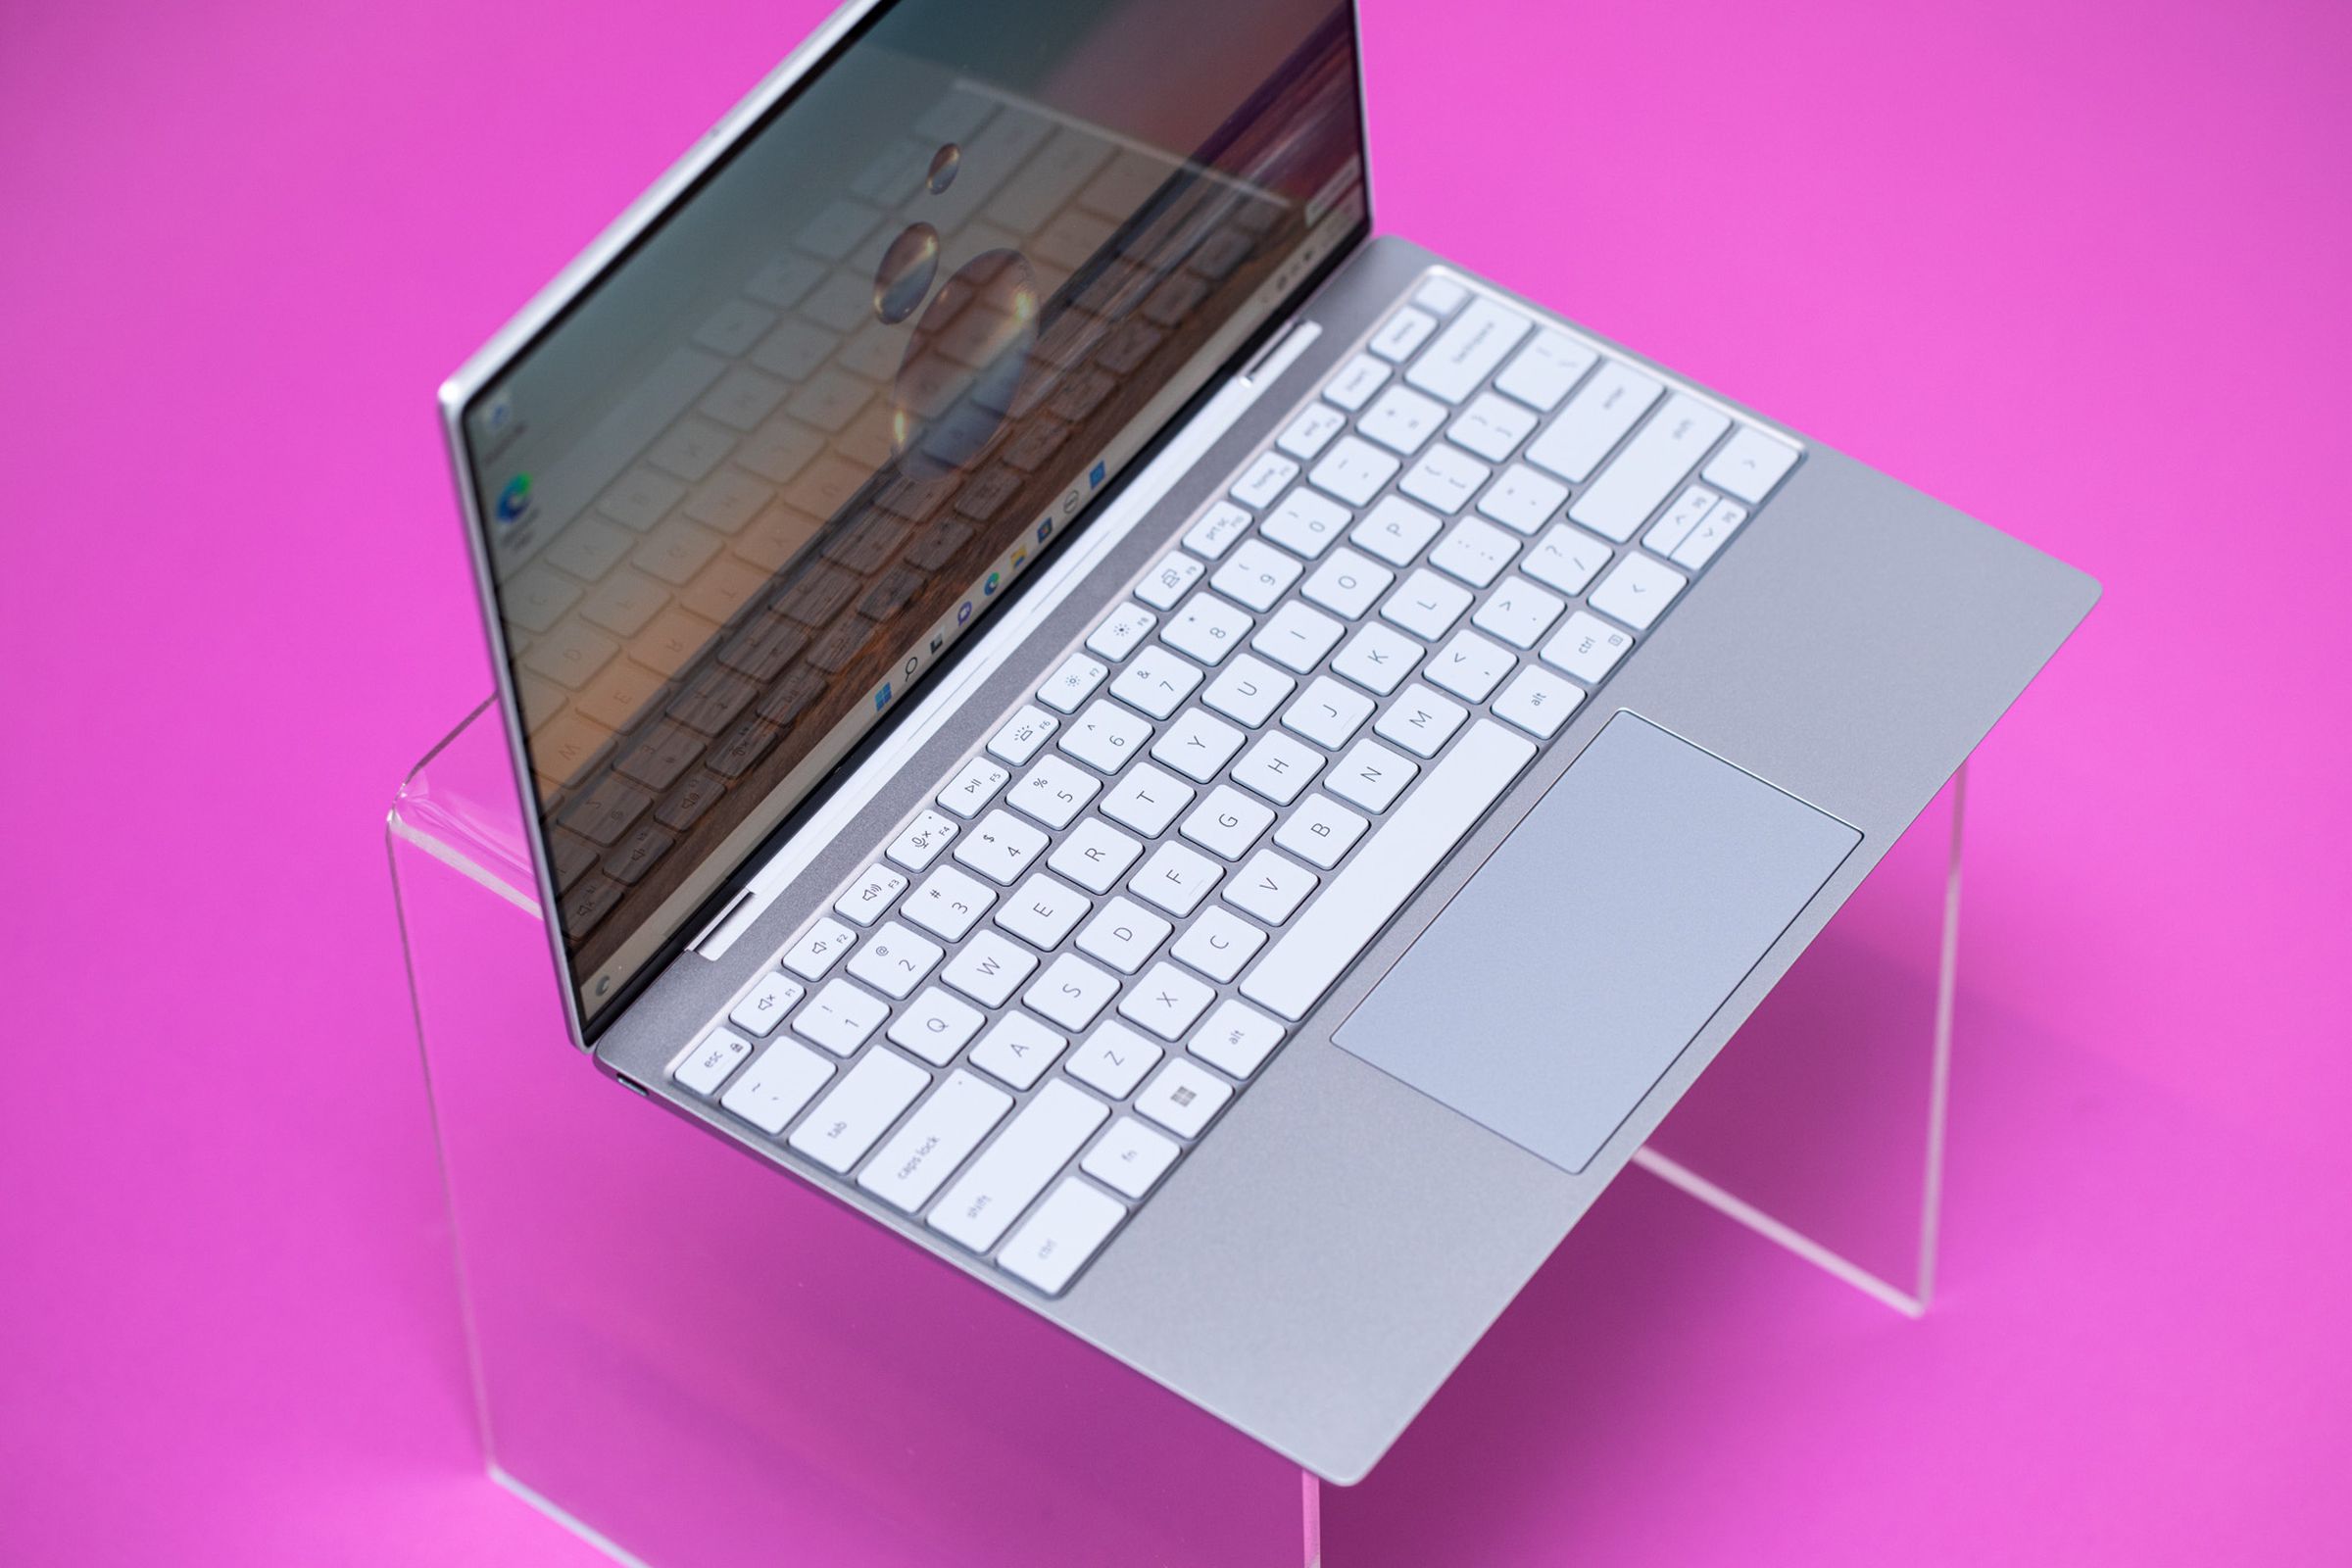 Best Laptop 2023: Dell XPS 13 on a pink surface seen from above.